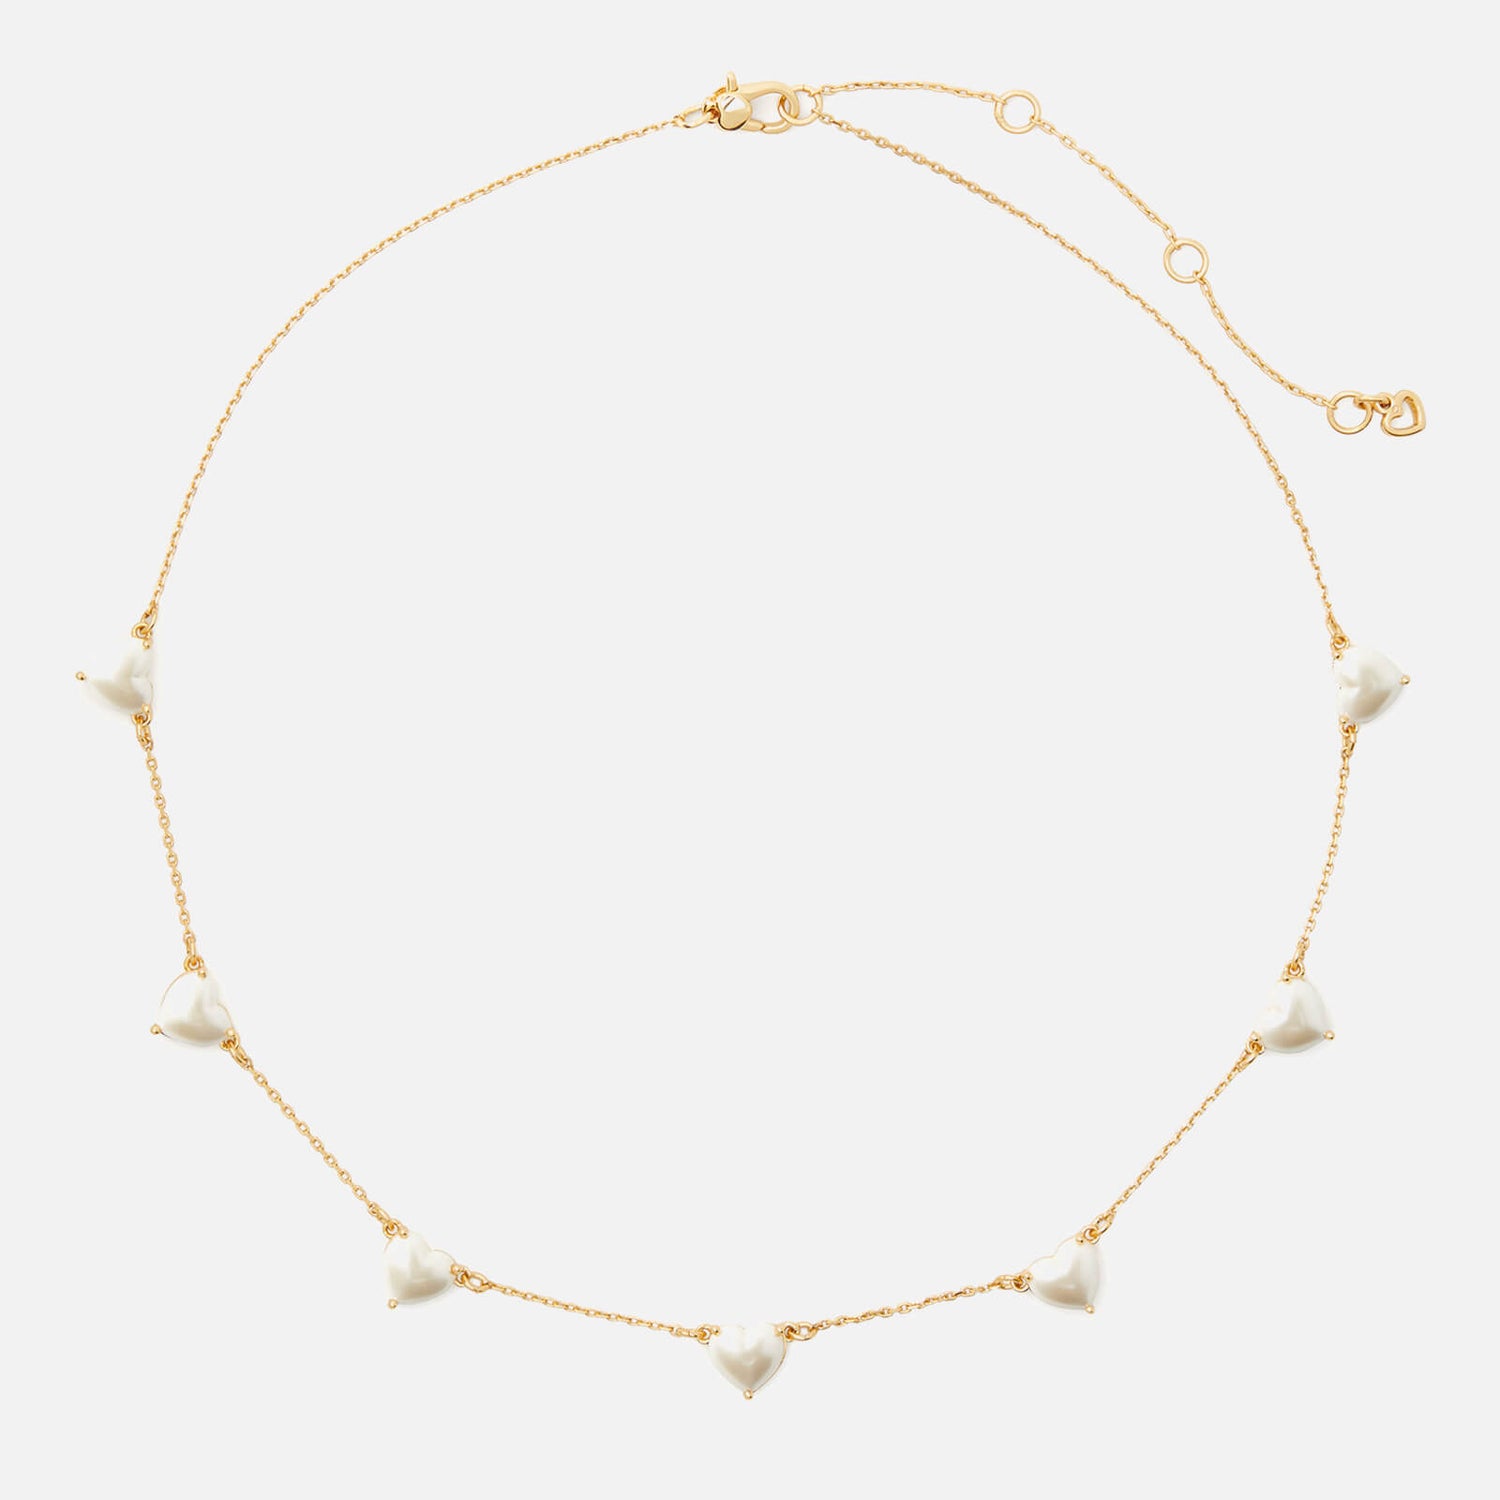 Kate Spade New York Scatter Gold-Tone Necklace